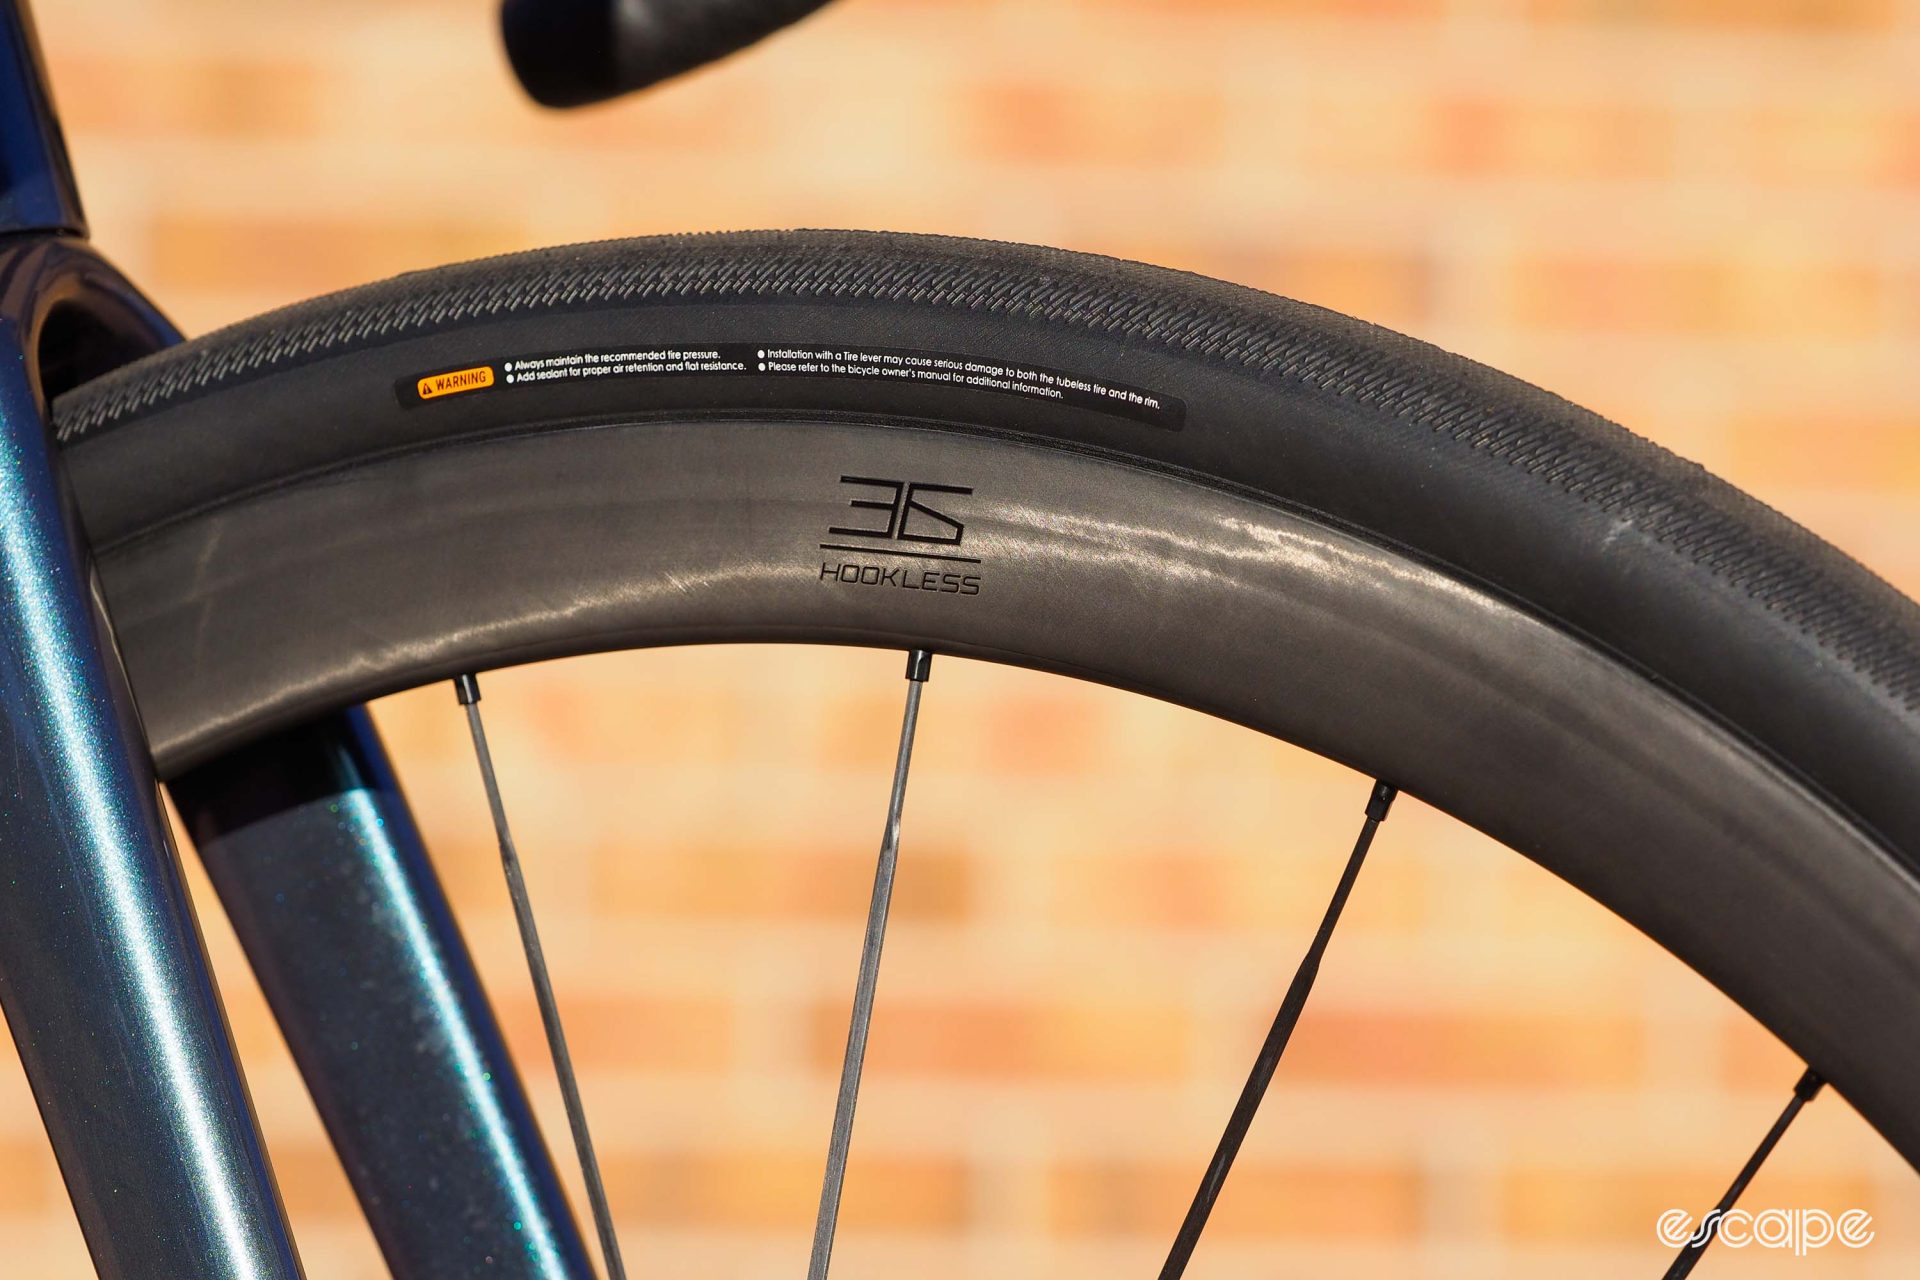 A closeup of the Cadex wheels, showing a logo for hookless rim sections.